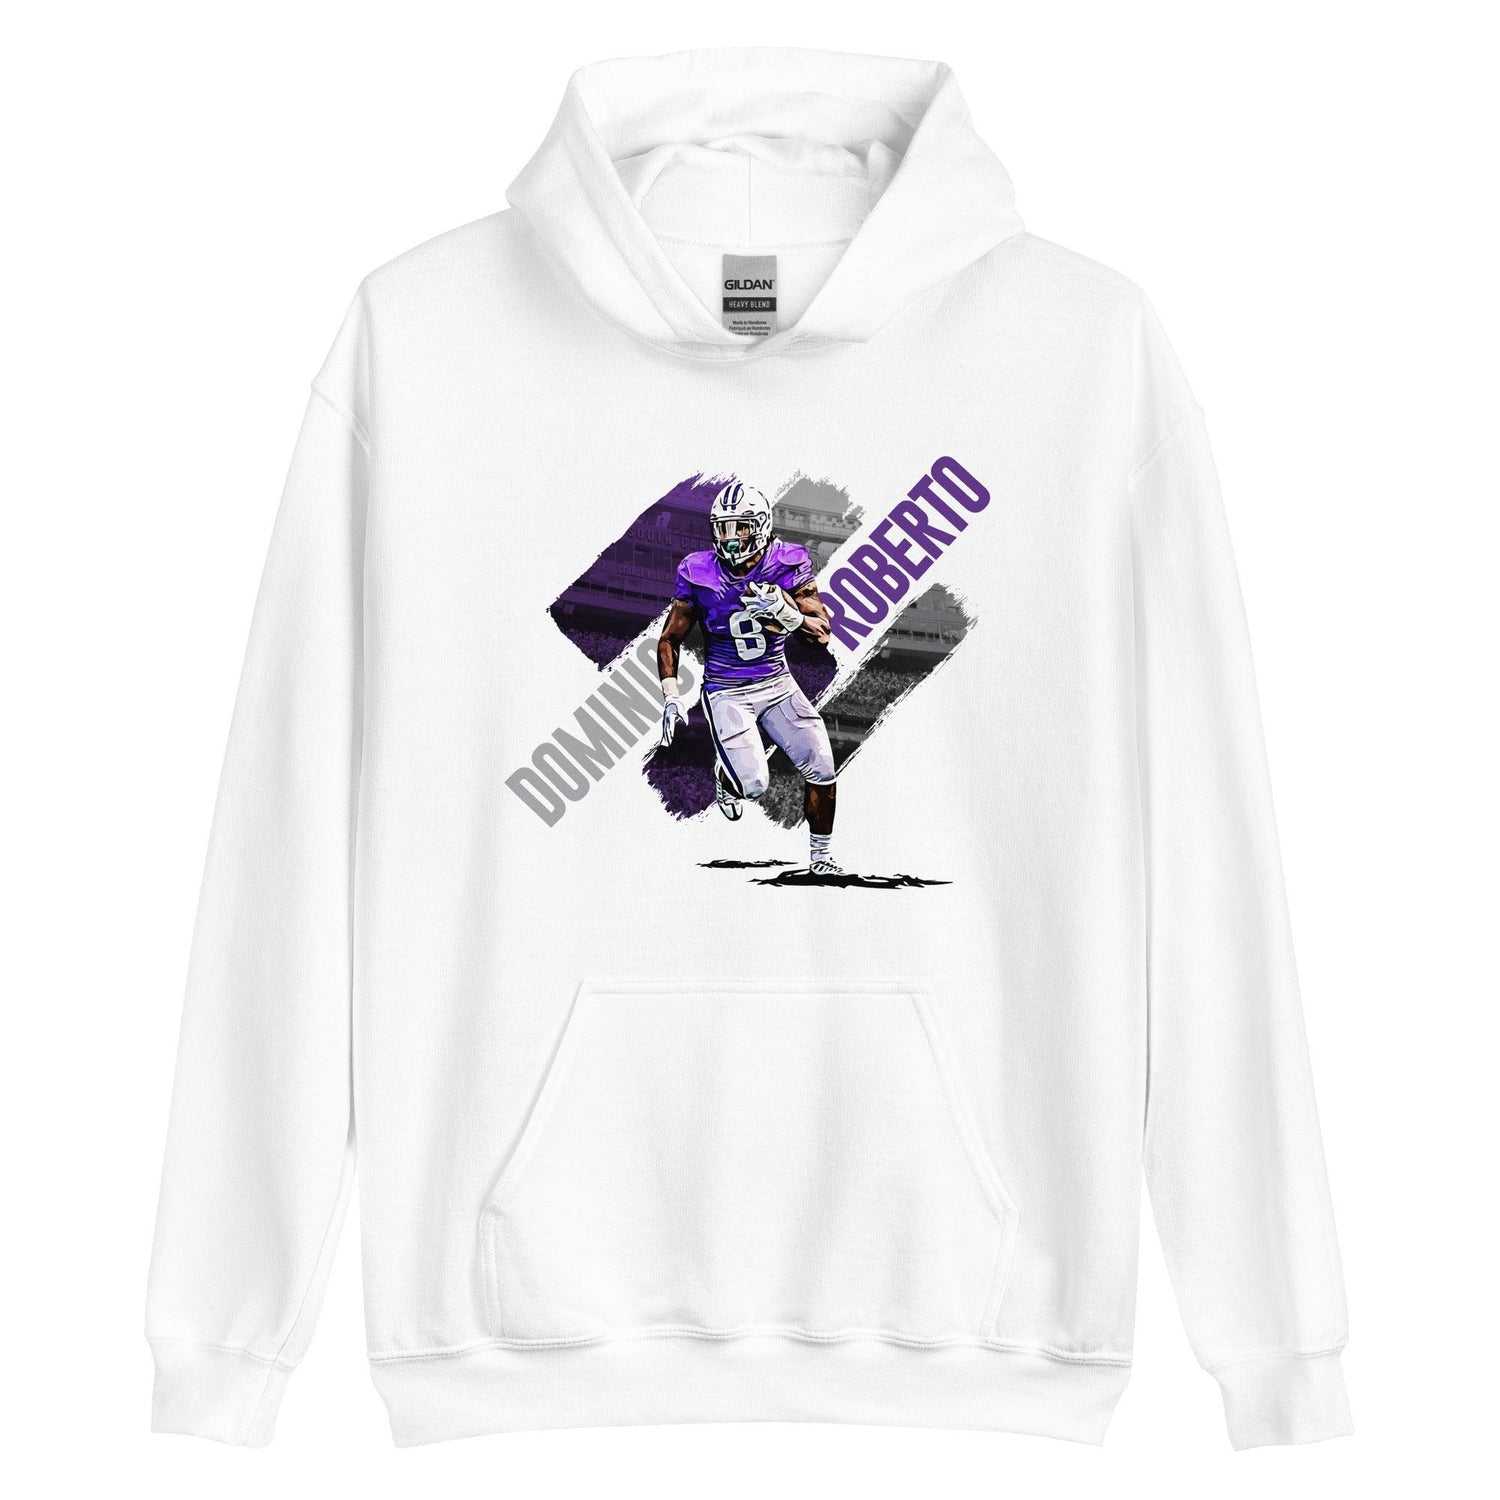 Dominic Roberto "Gameday" Hoodie - Fan Arch